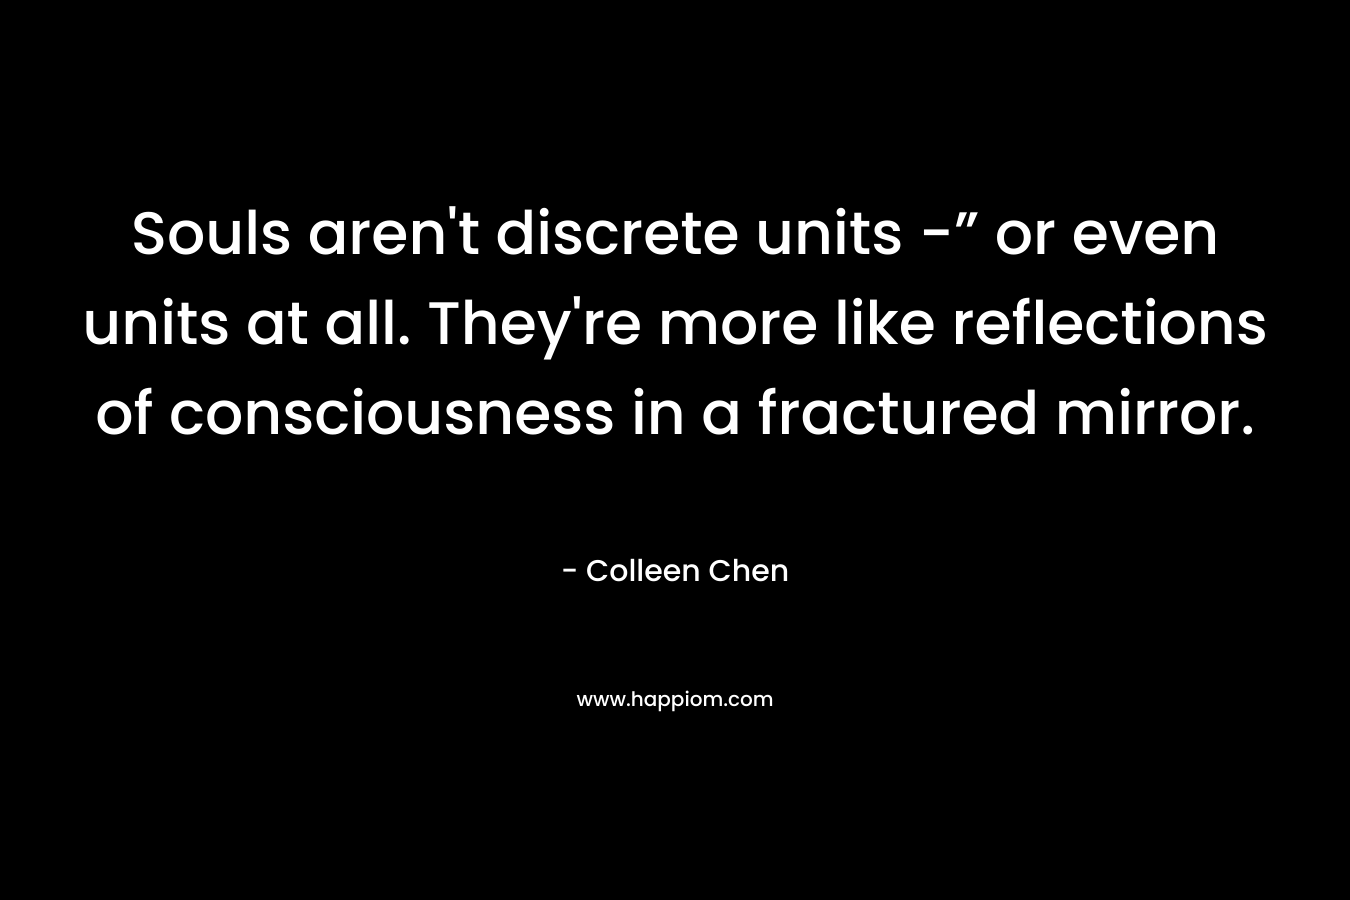 Souls aren't discrete units -” or even units at all. They're more like reflections of consciousness in a fractured mirror.